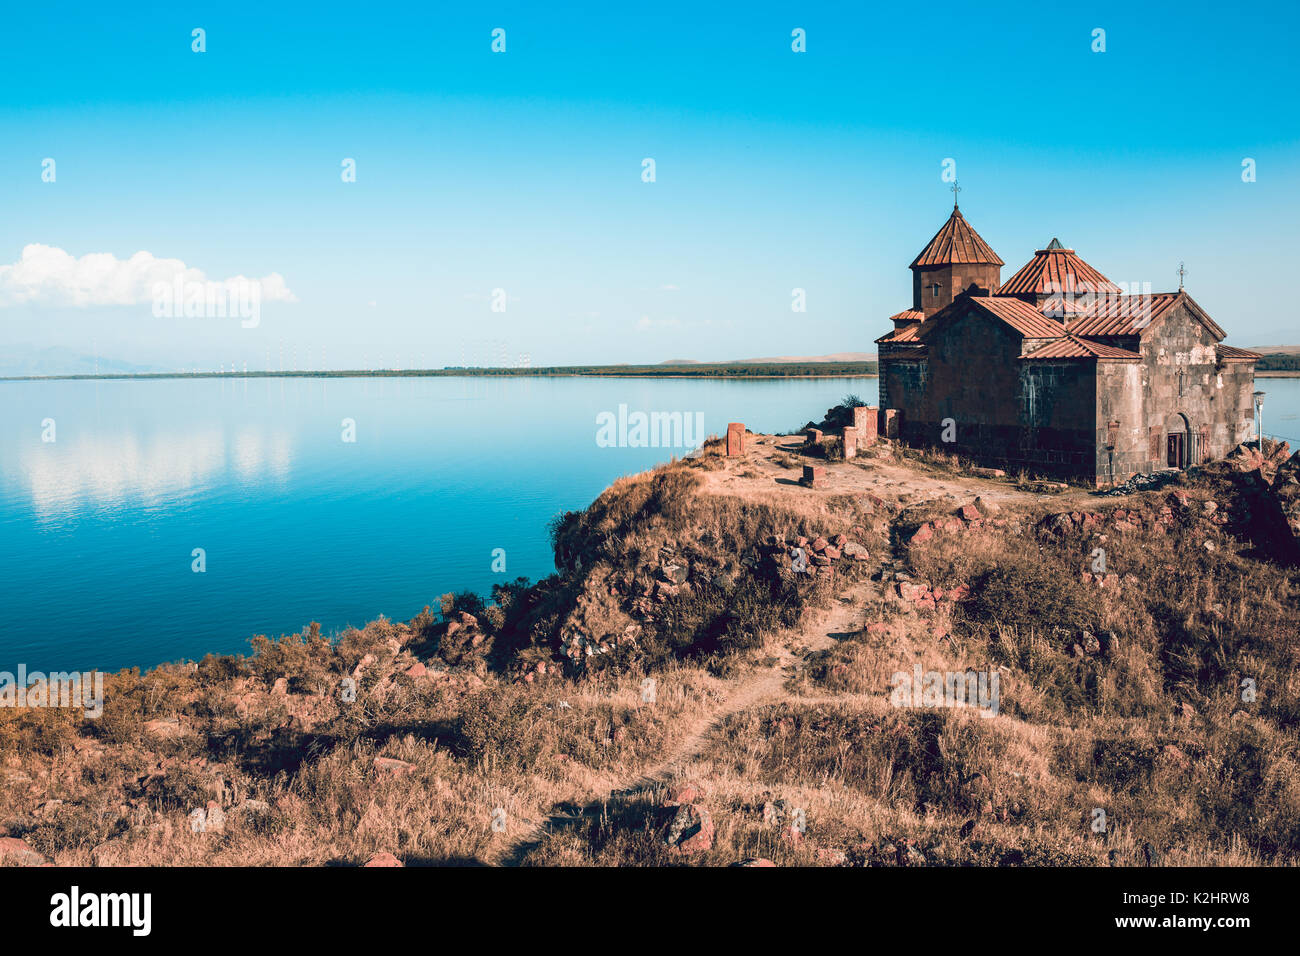 Ancient church in Armenia. Hayravank Monastery on the shore of lake Sevan. Travel destination. Concept of travel and exploration. Stock Photo